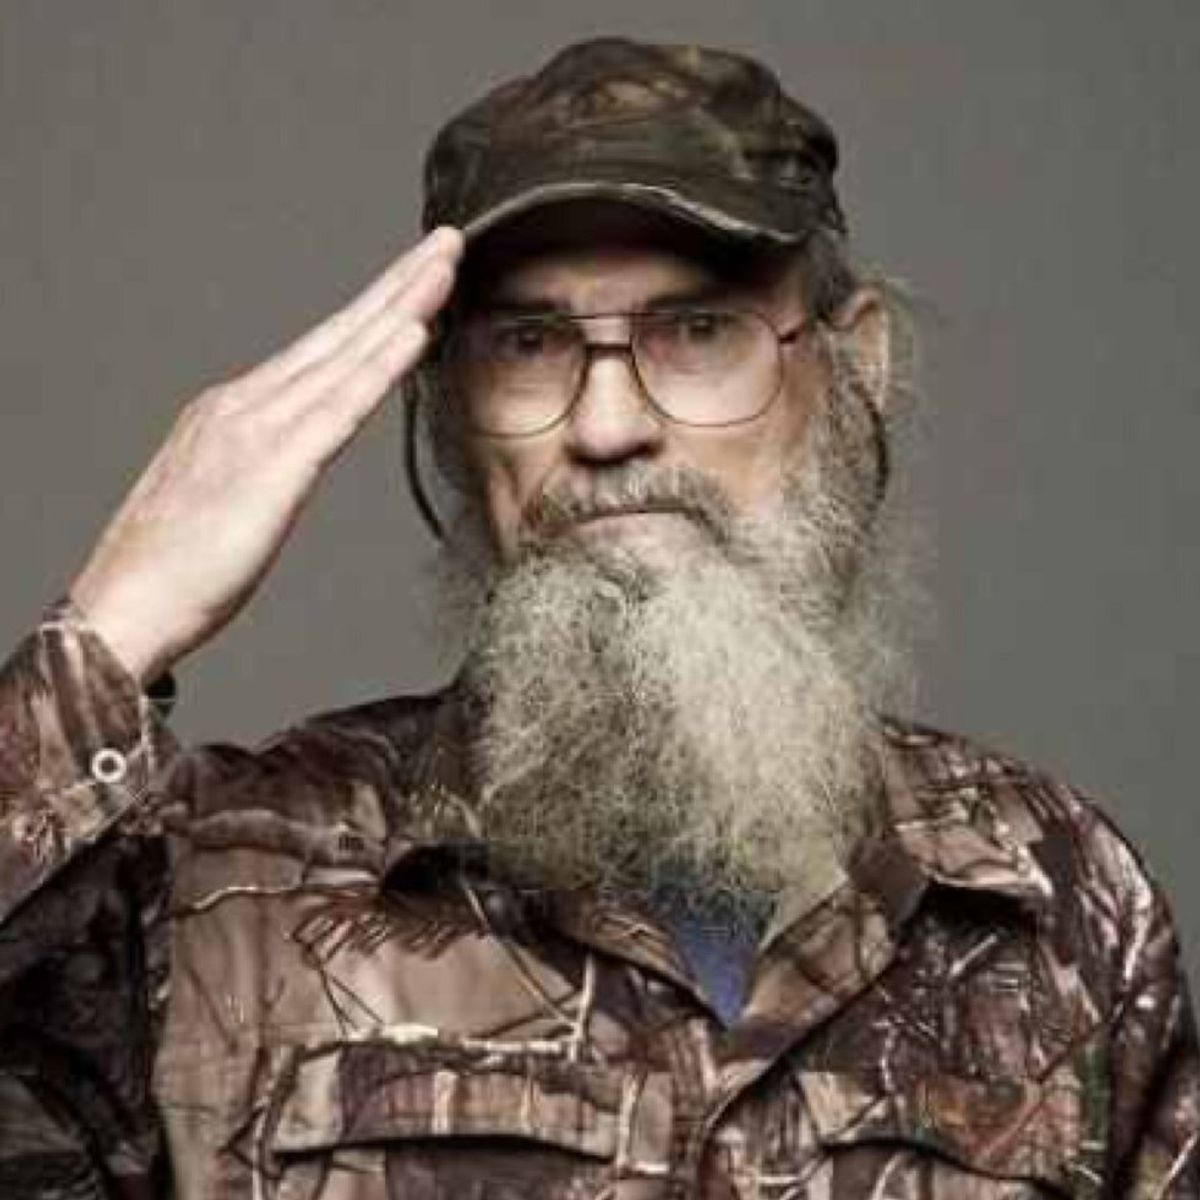 Uncle Si's Best Moments On "Duck Dynasty"